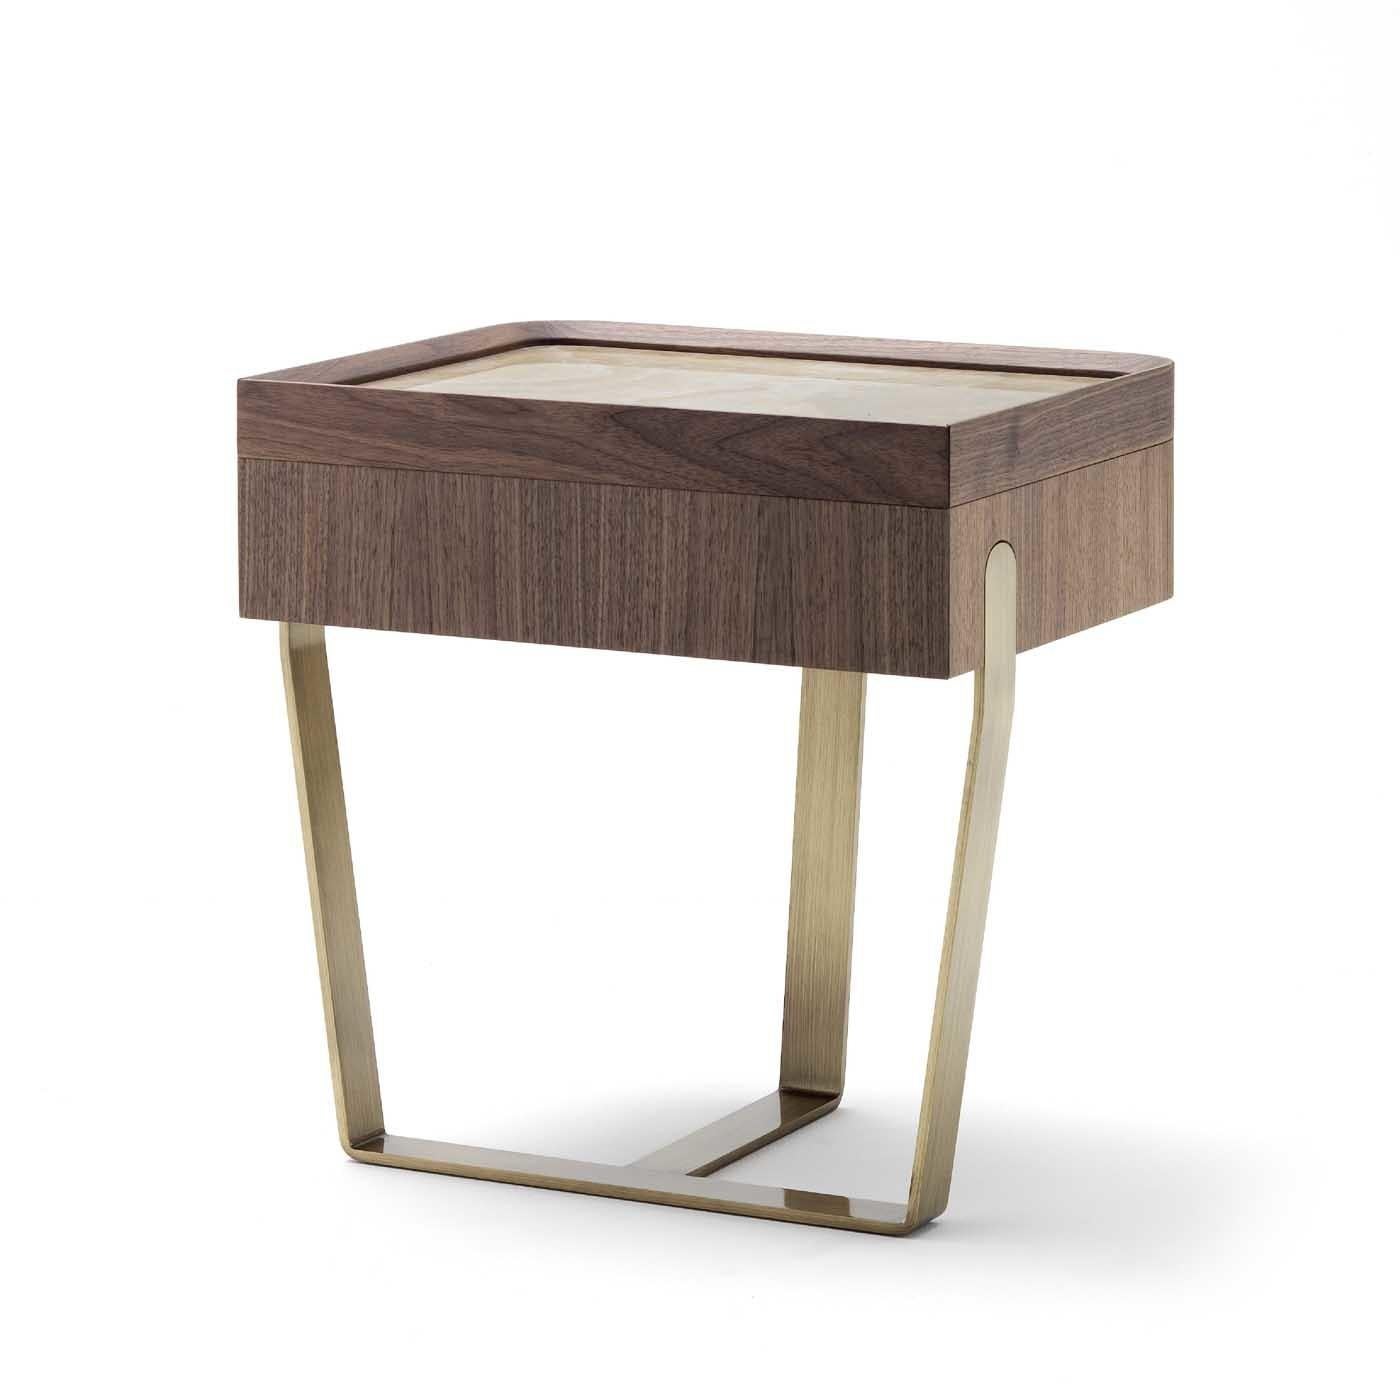 As a statement piece or combined with the desirè bench to provide highlight a modern bed frame, this elegant nightstand is a striking choice for a contemporary interior. The structure combines three crossing elements in metal with a luminous satin